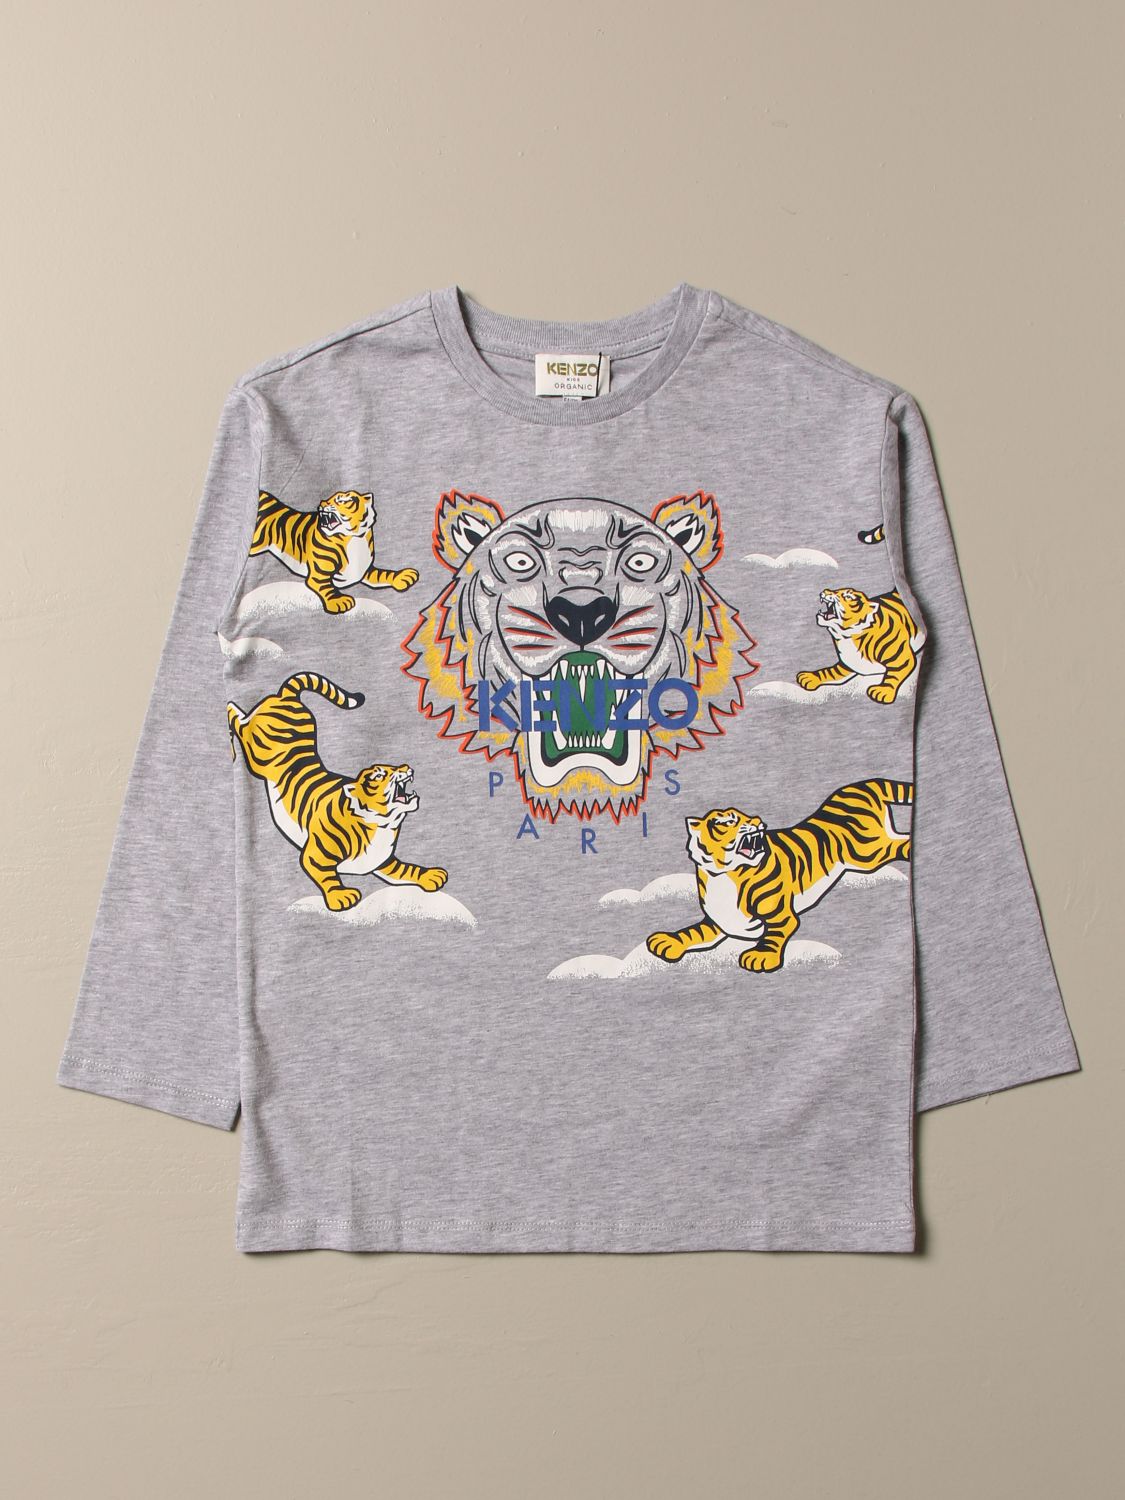 kenzo shirts for toddlers